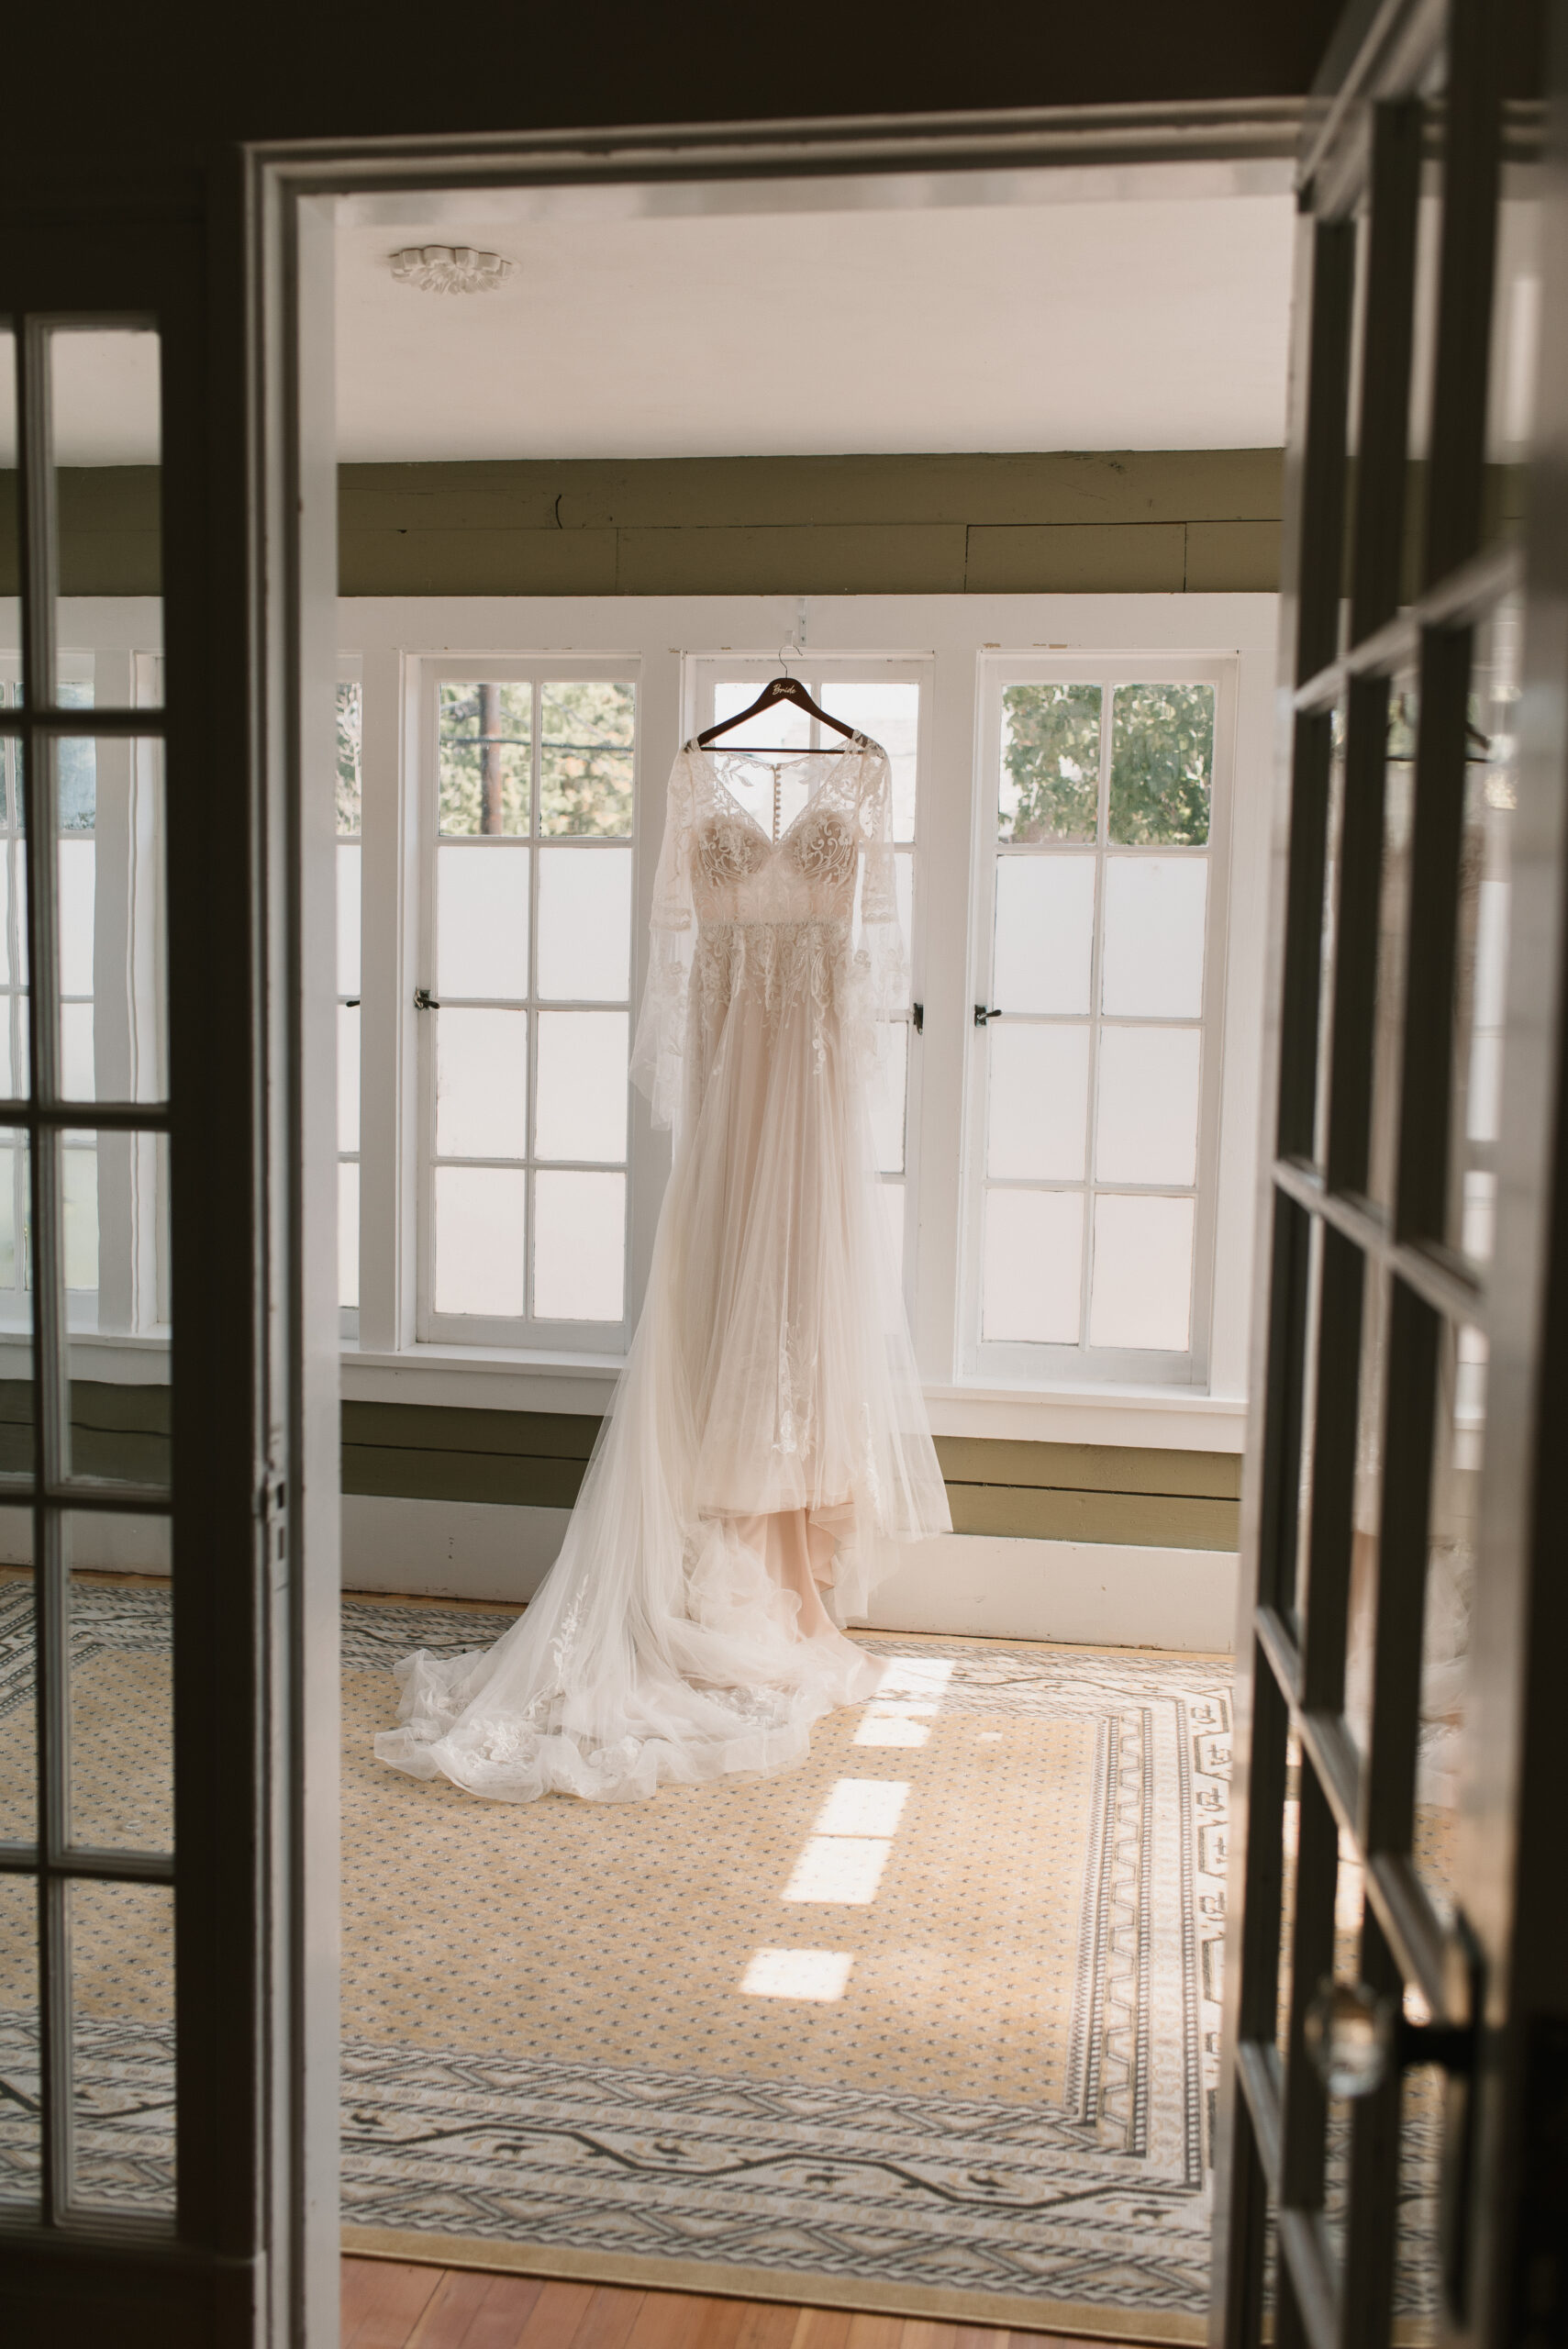 brides dress hanging from window